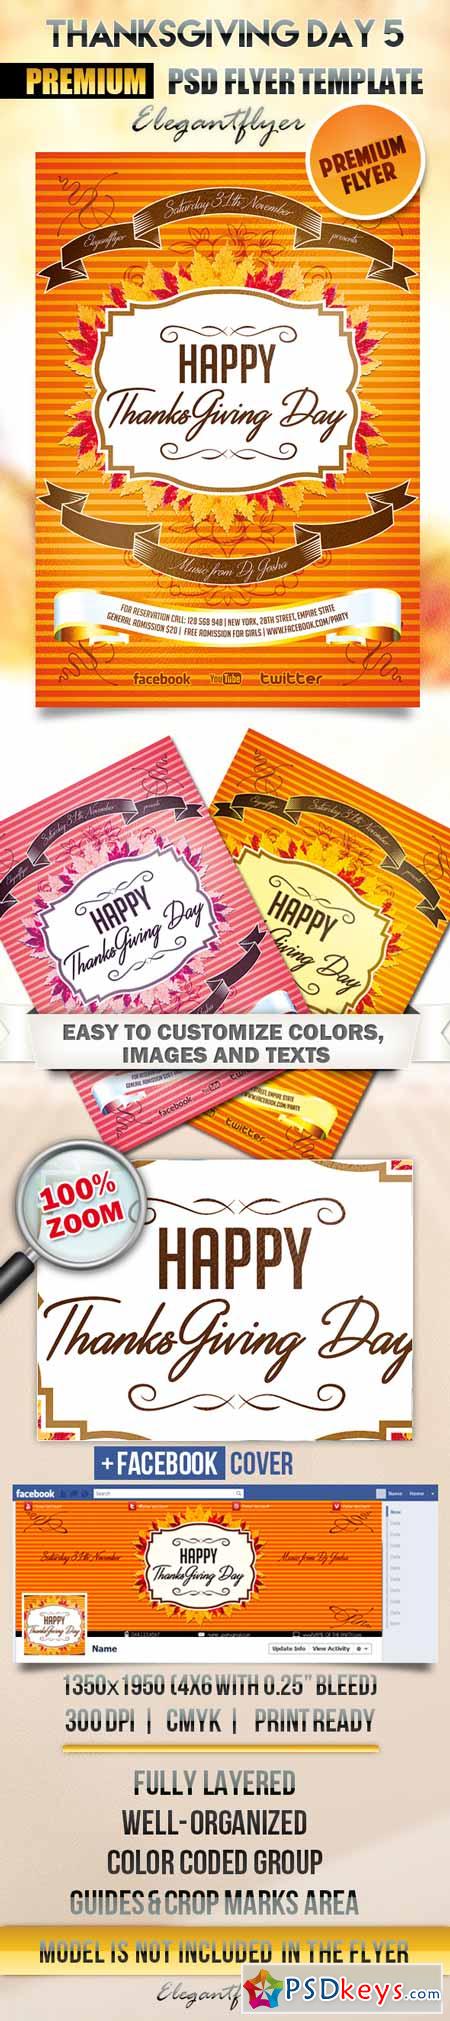 Thanksgiving Day 5  Flyer PSD Template + Facebook Cover